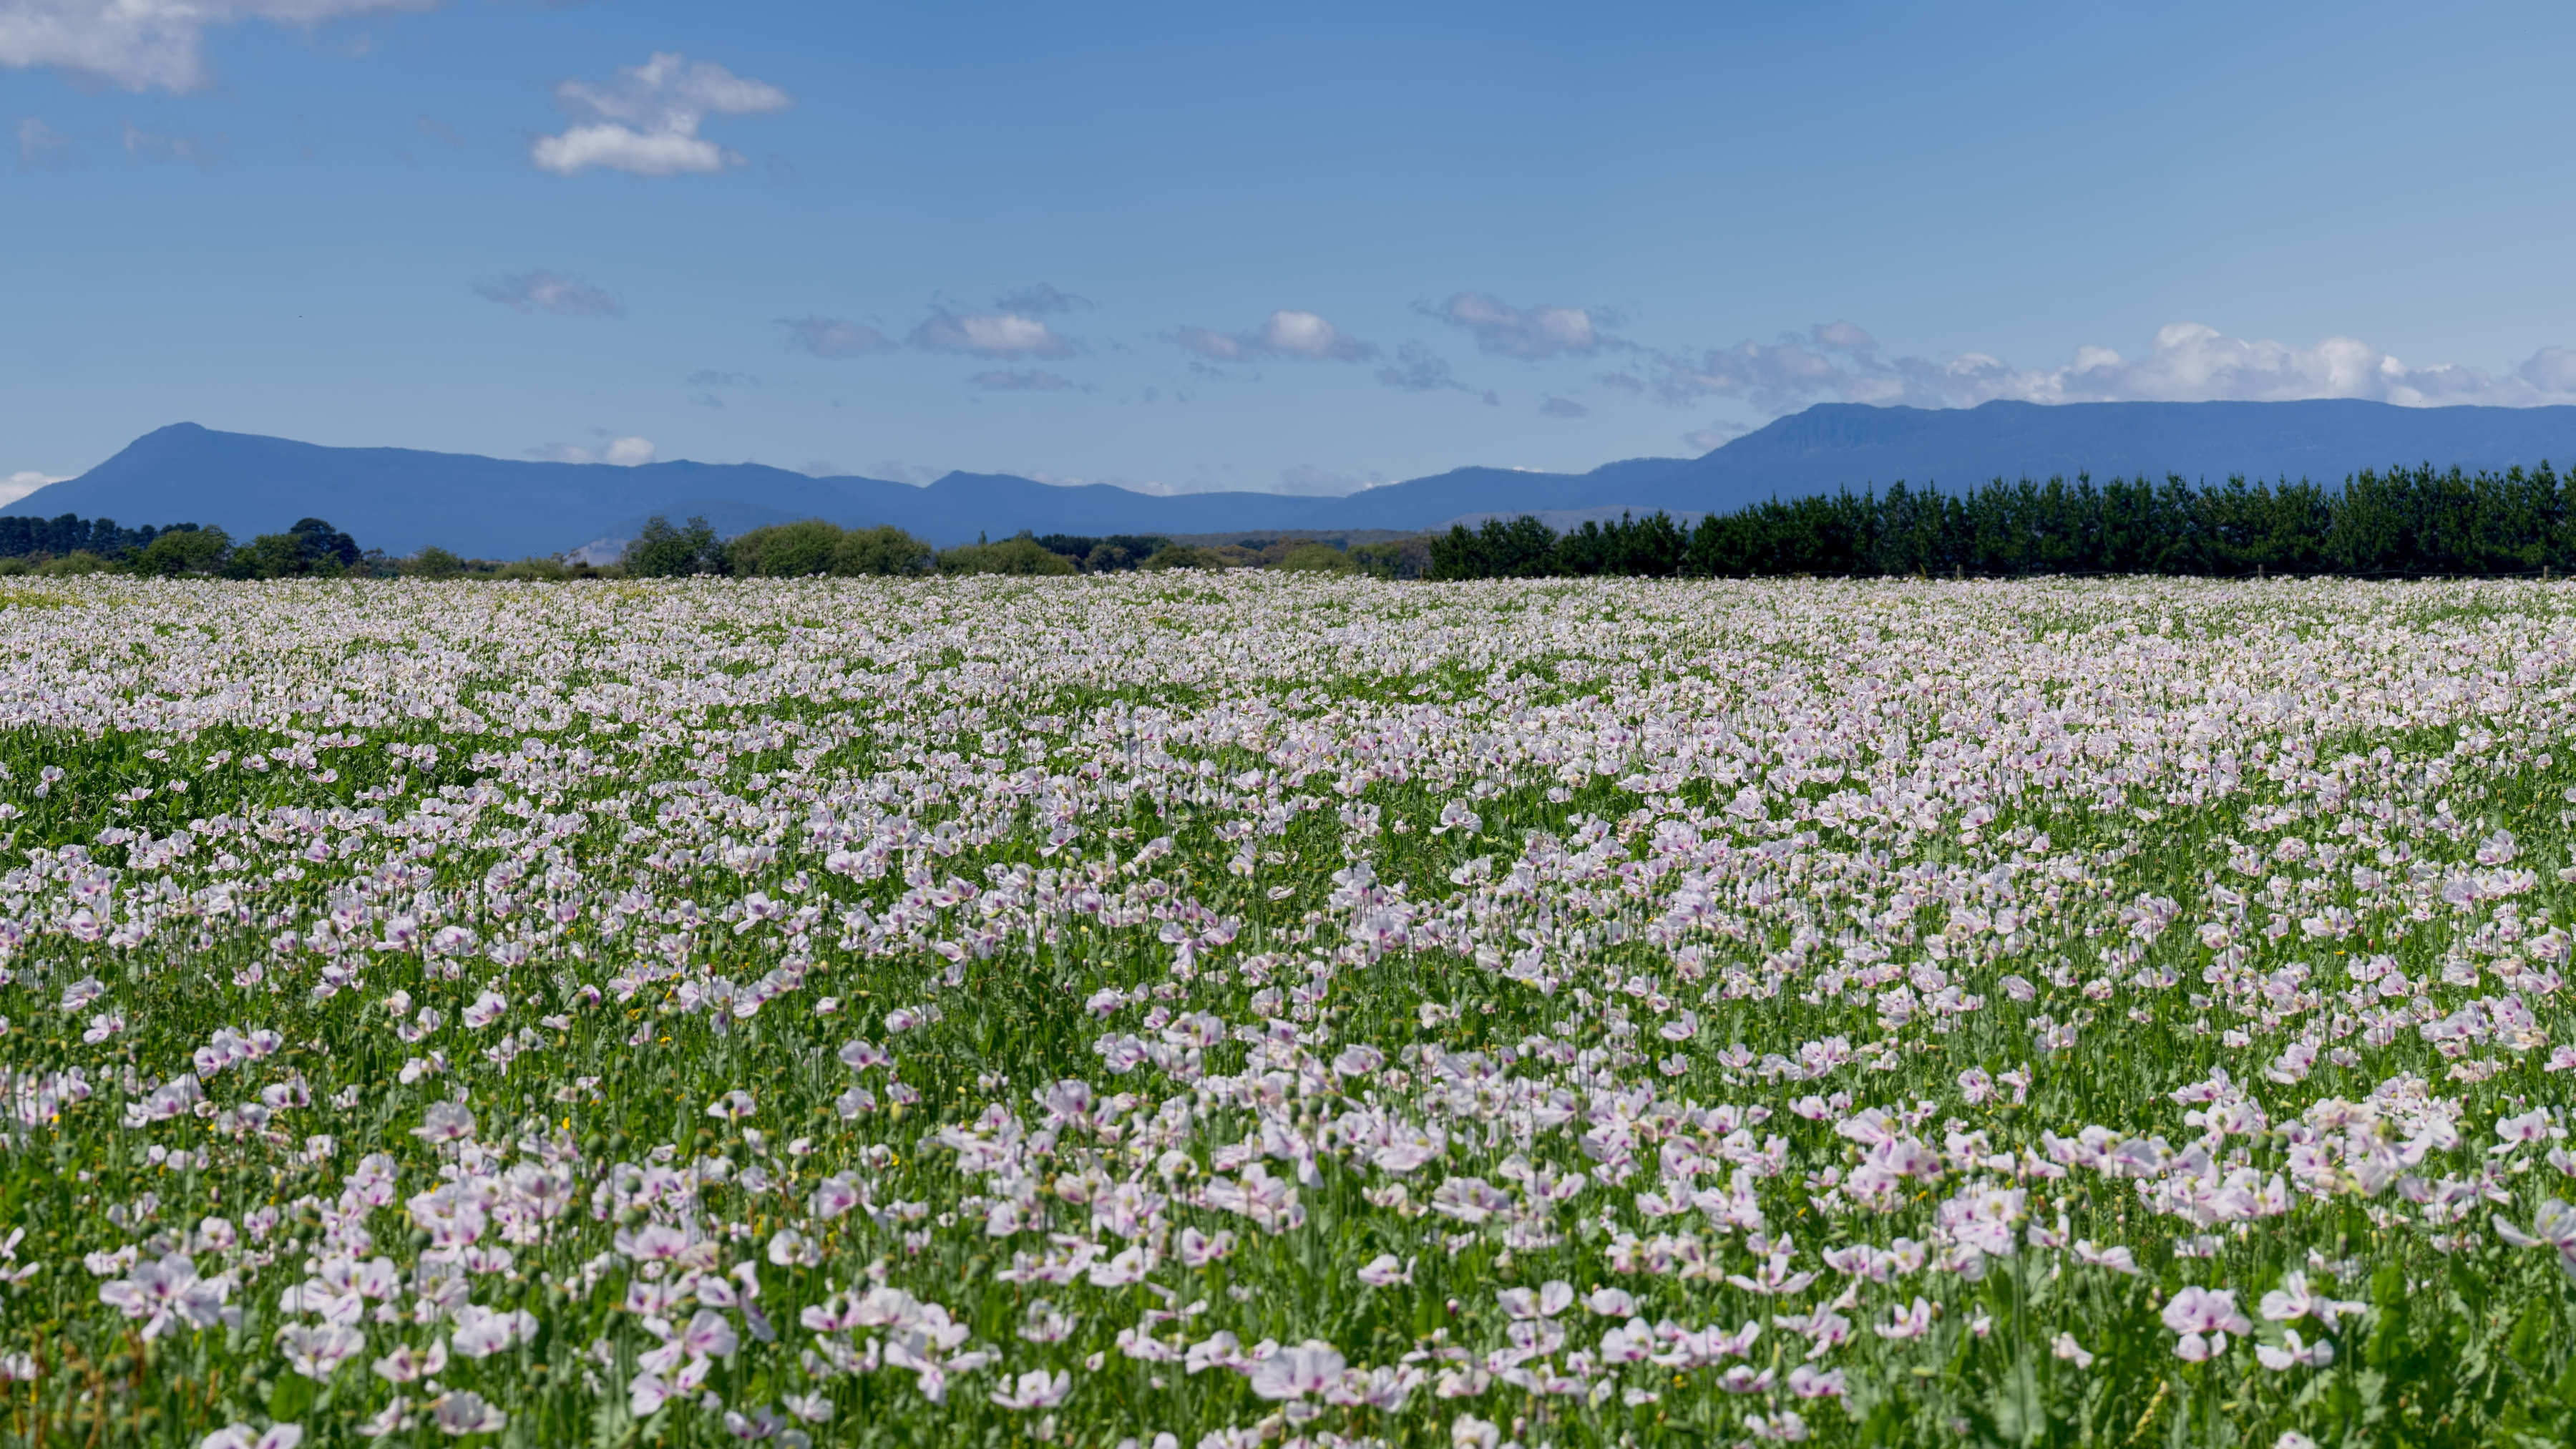 A field of pale pink poppy flowers with trees and a mountain range in the distance. Photo: kummeleon / iStock.